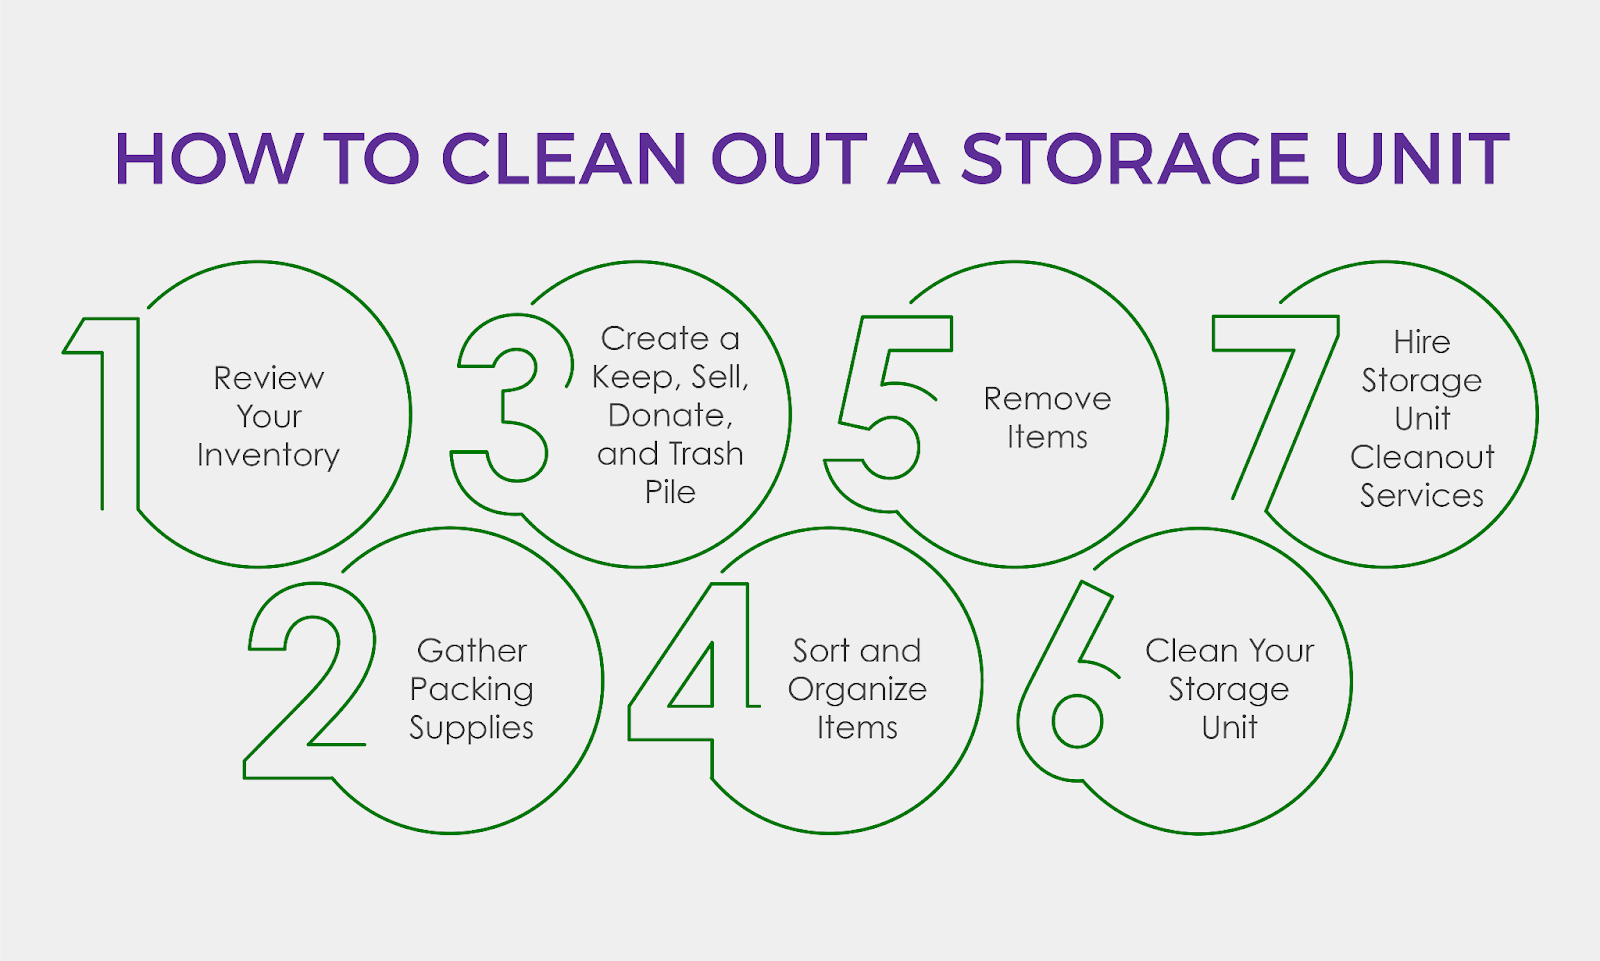 How to clean out a storage unit